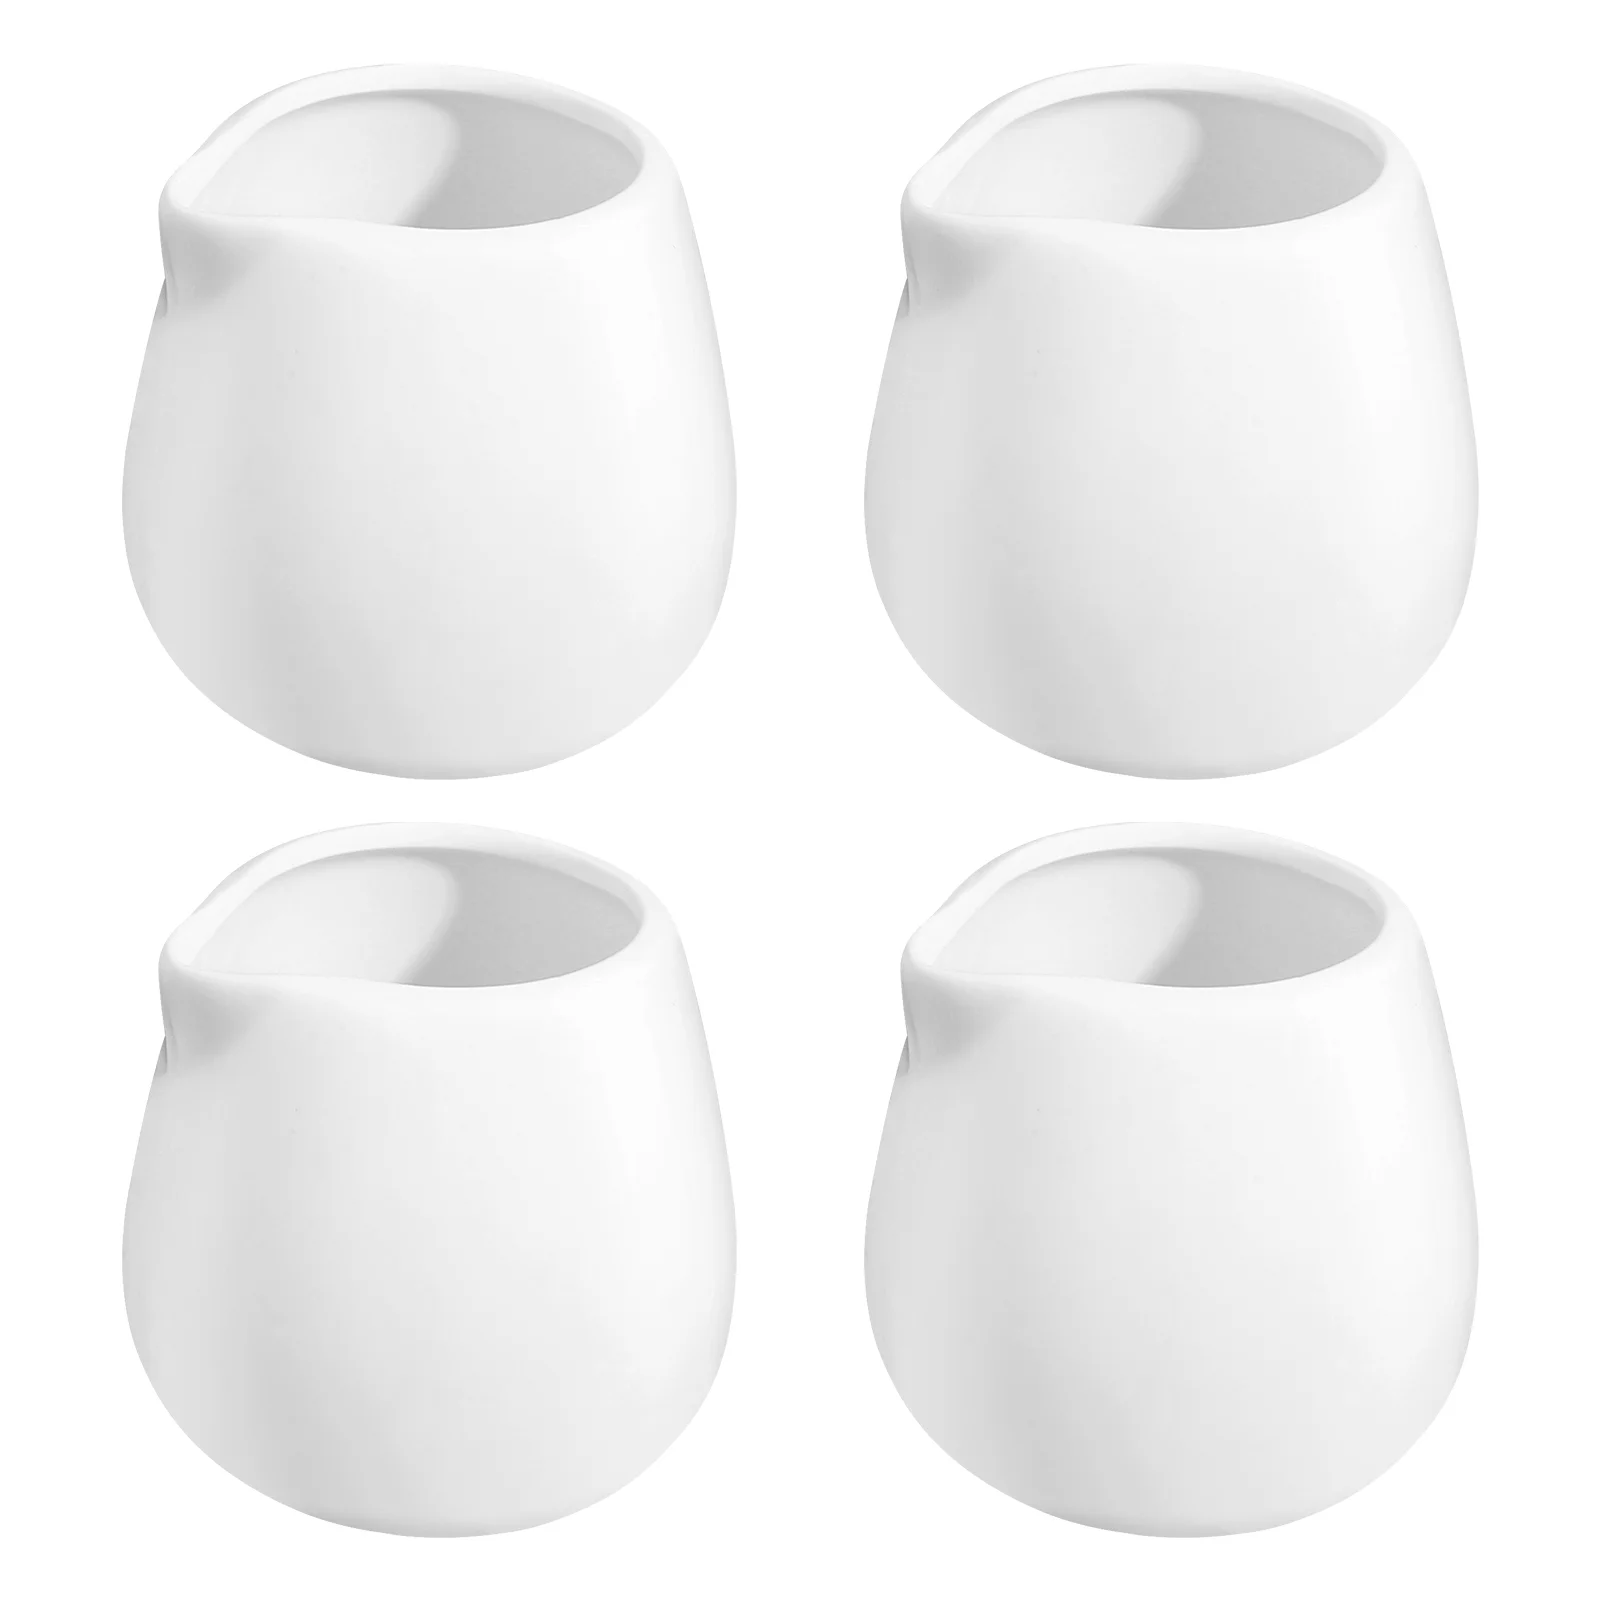 

Ceramic Mini Creamer White Pitcher Jug Sauce Coffee Pitchers Cups Jugs Handle Without Cup Cream